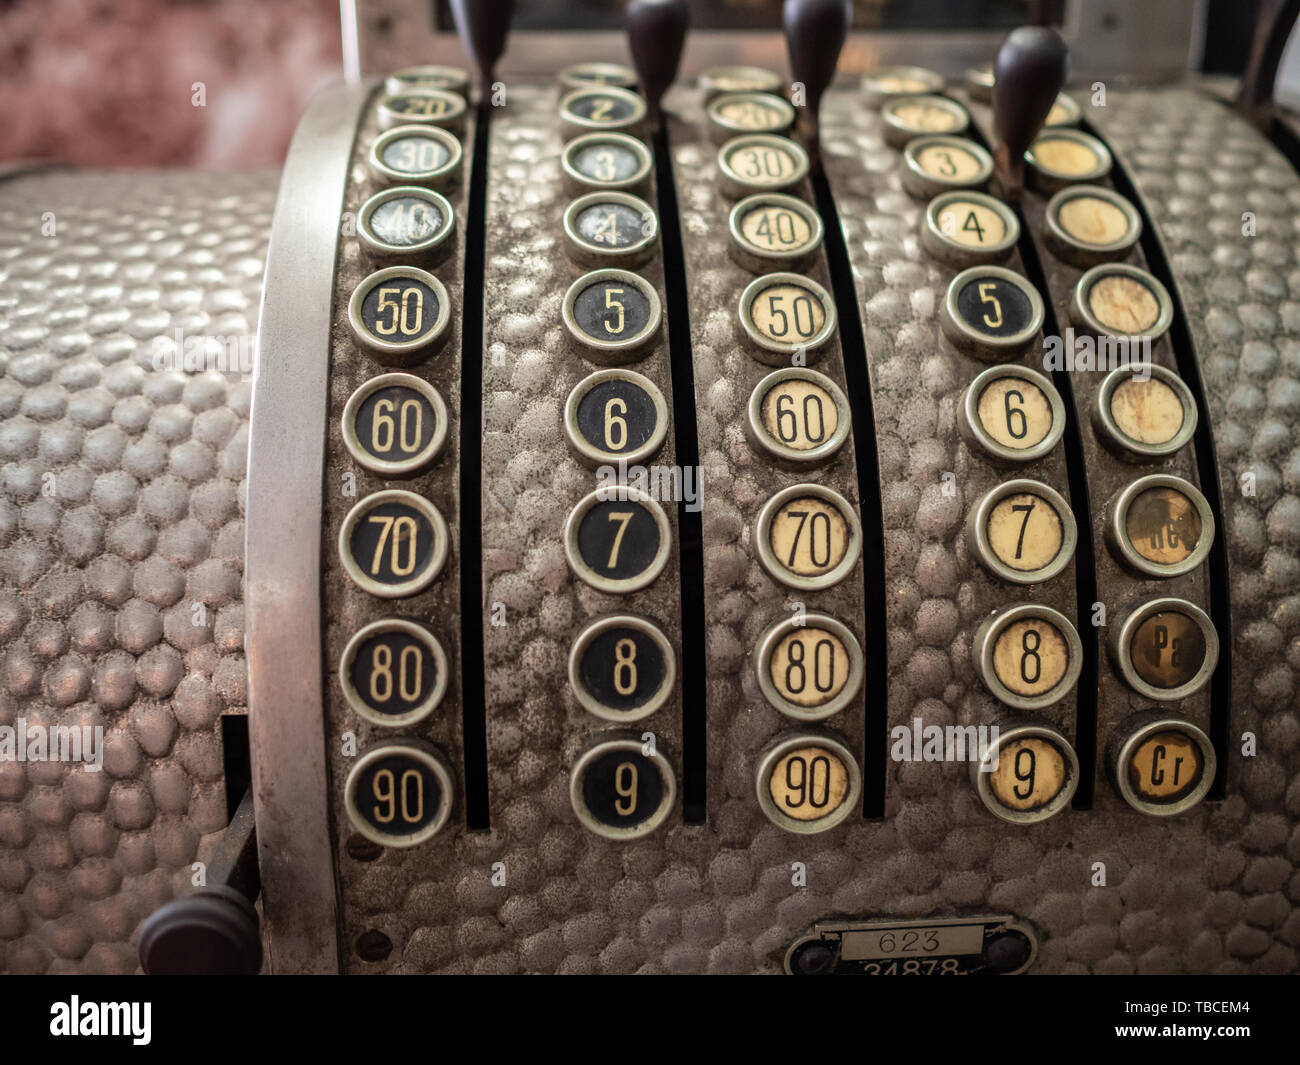 Vintage metal cash register with numbered buttons Stock Photo